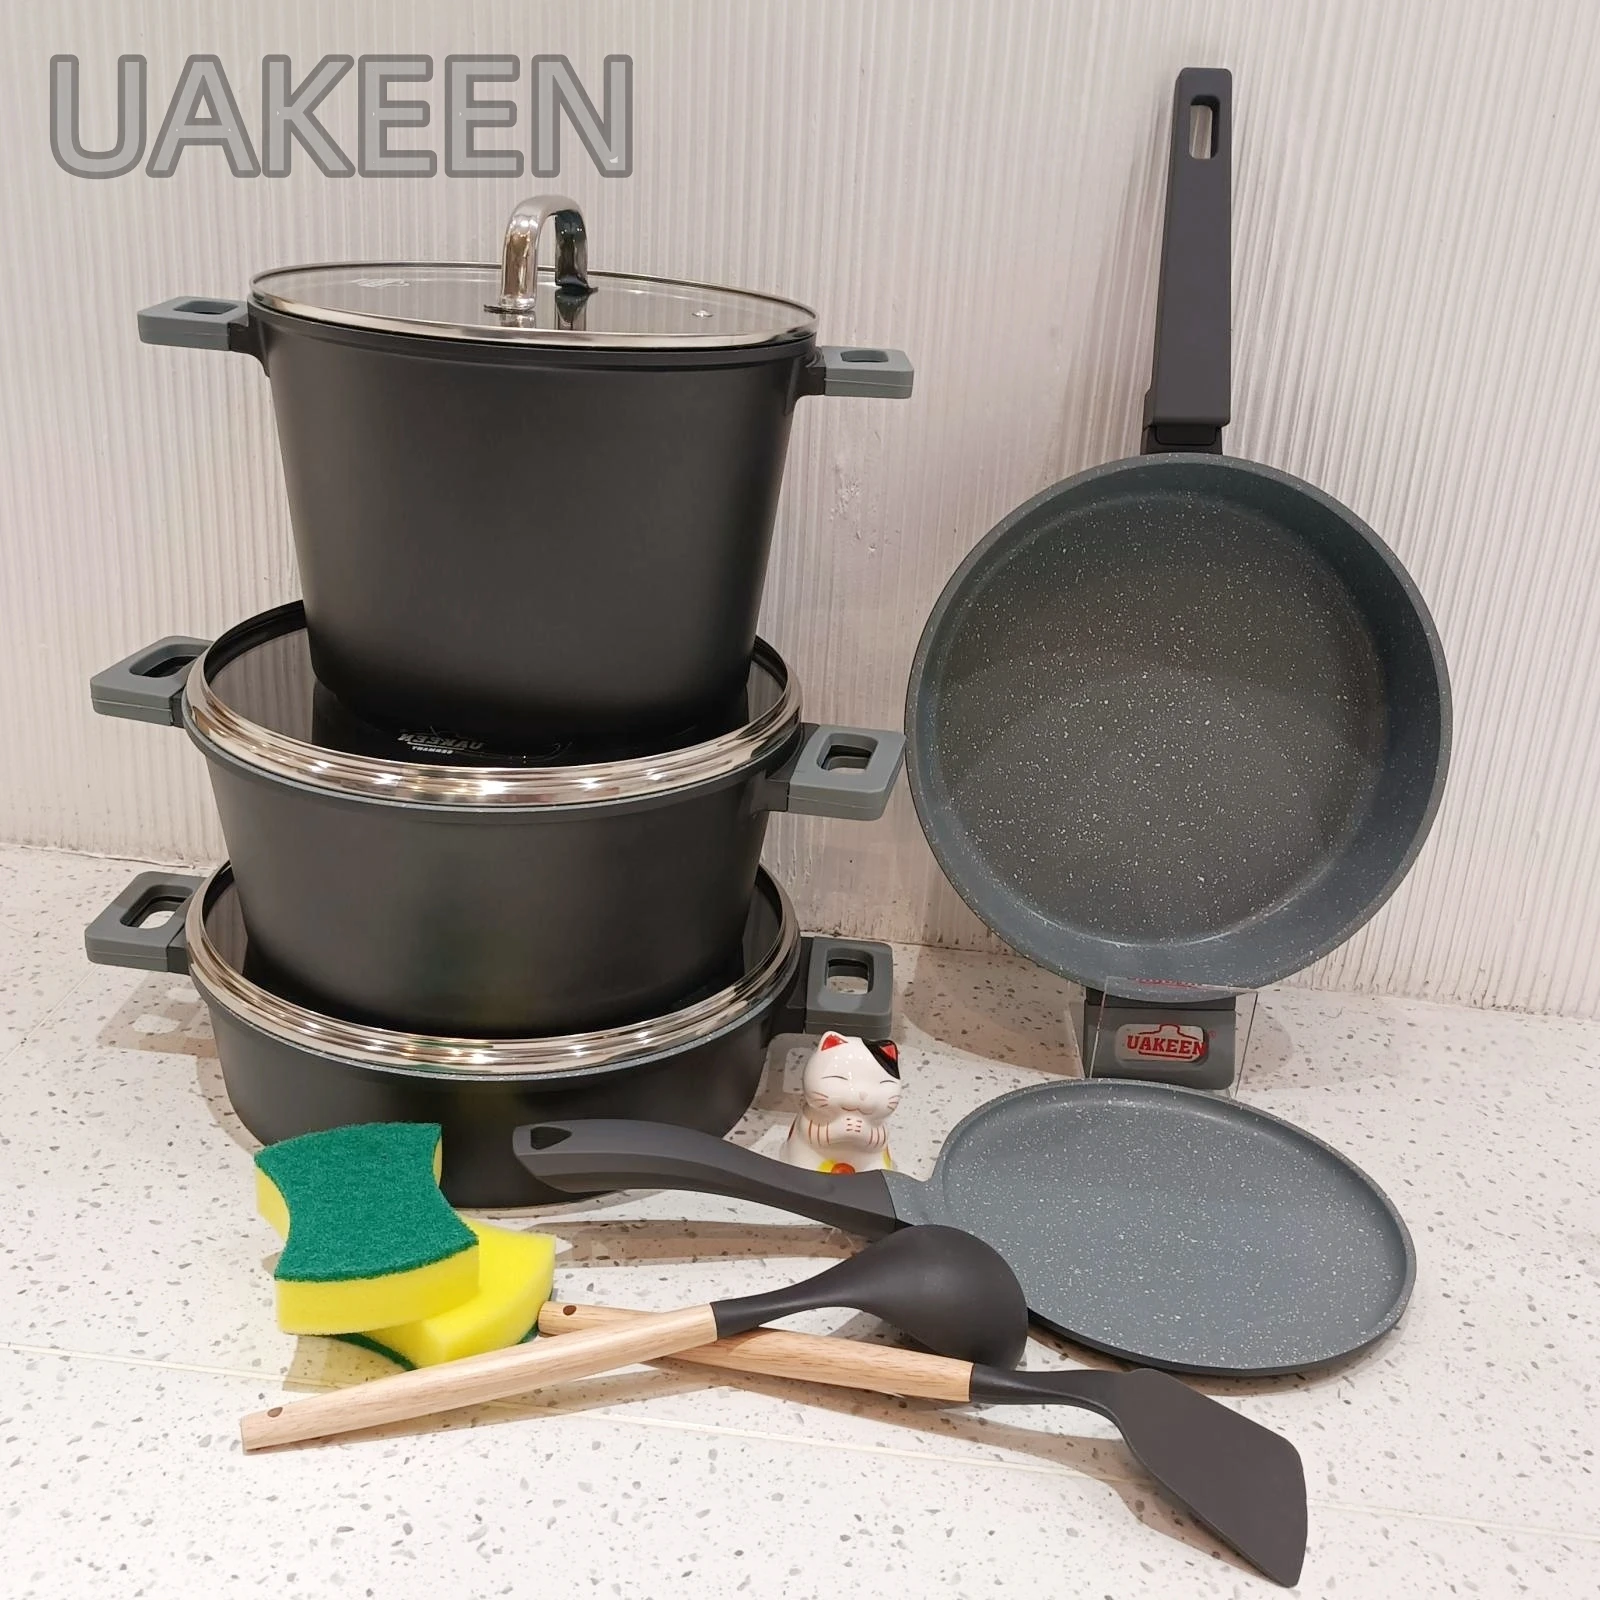 Uakeen Germany 12 Pcs Cookware Granite Sets – Nazlan Rich Trading Co.